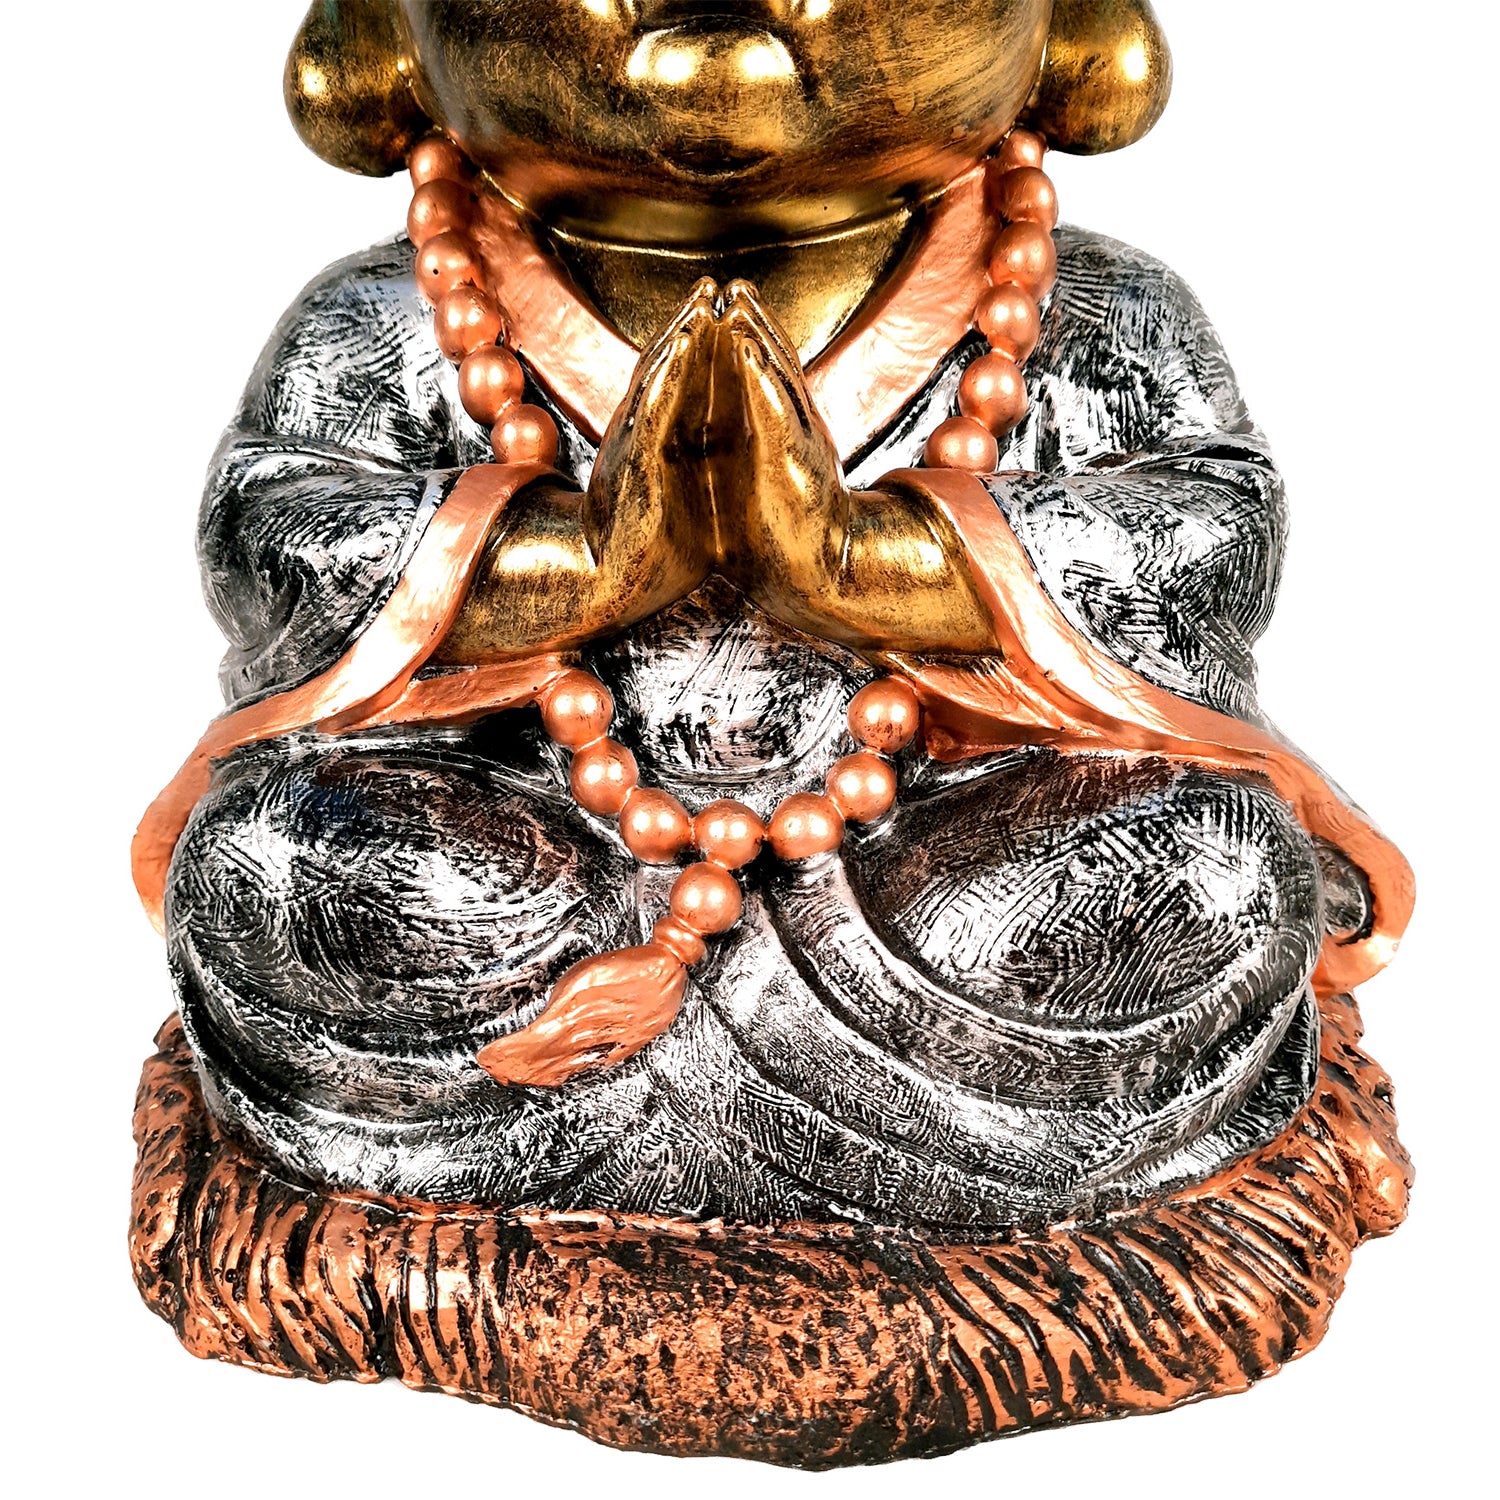 Baby Monk Showpiece with Rustic Look | Feng Shui Decor - For Good Luck, Home, Table, Office Decor & Gift -10 Inch - apkamart